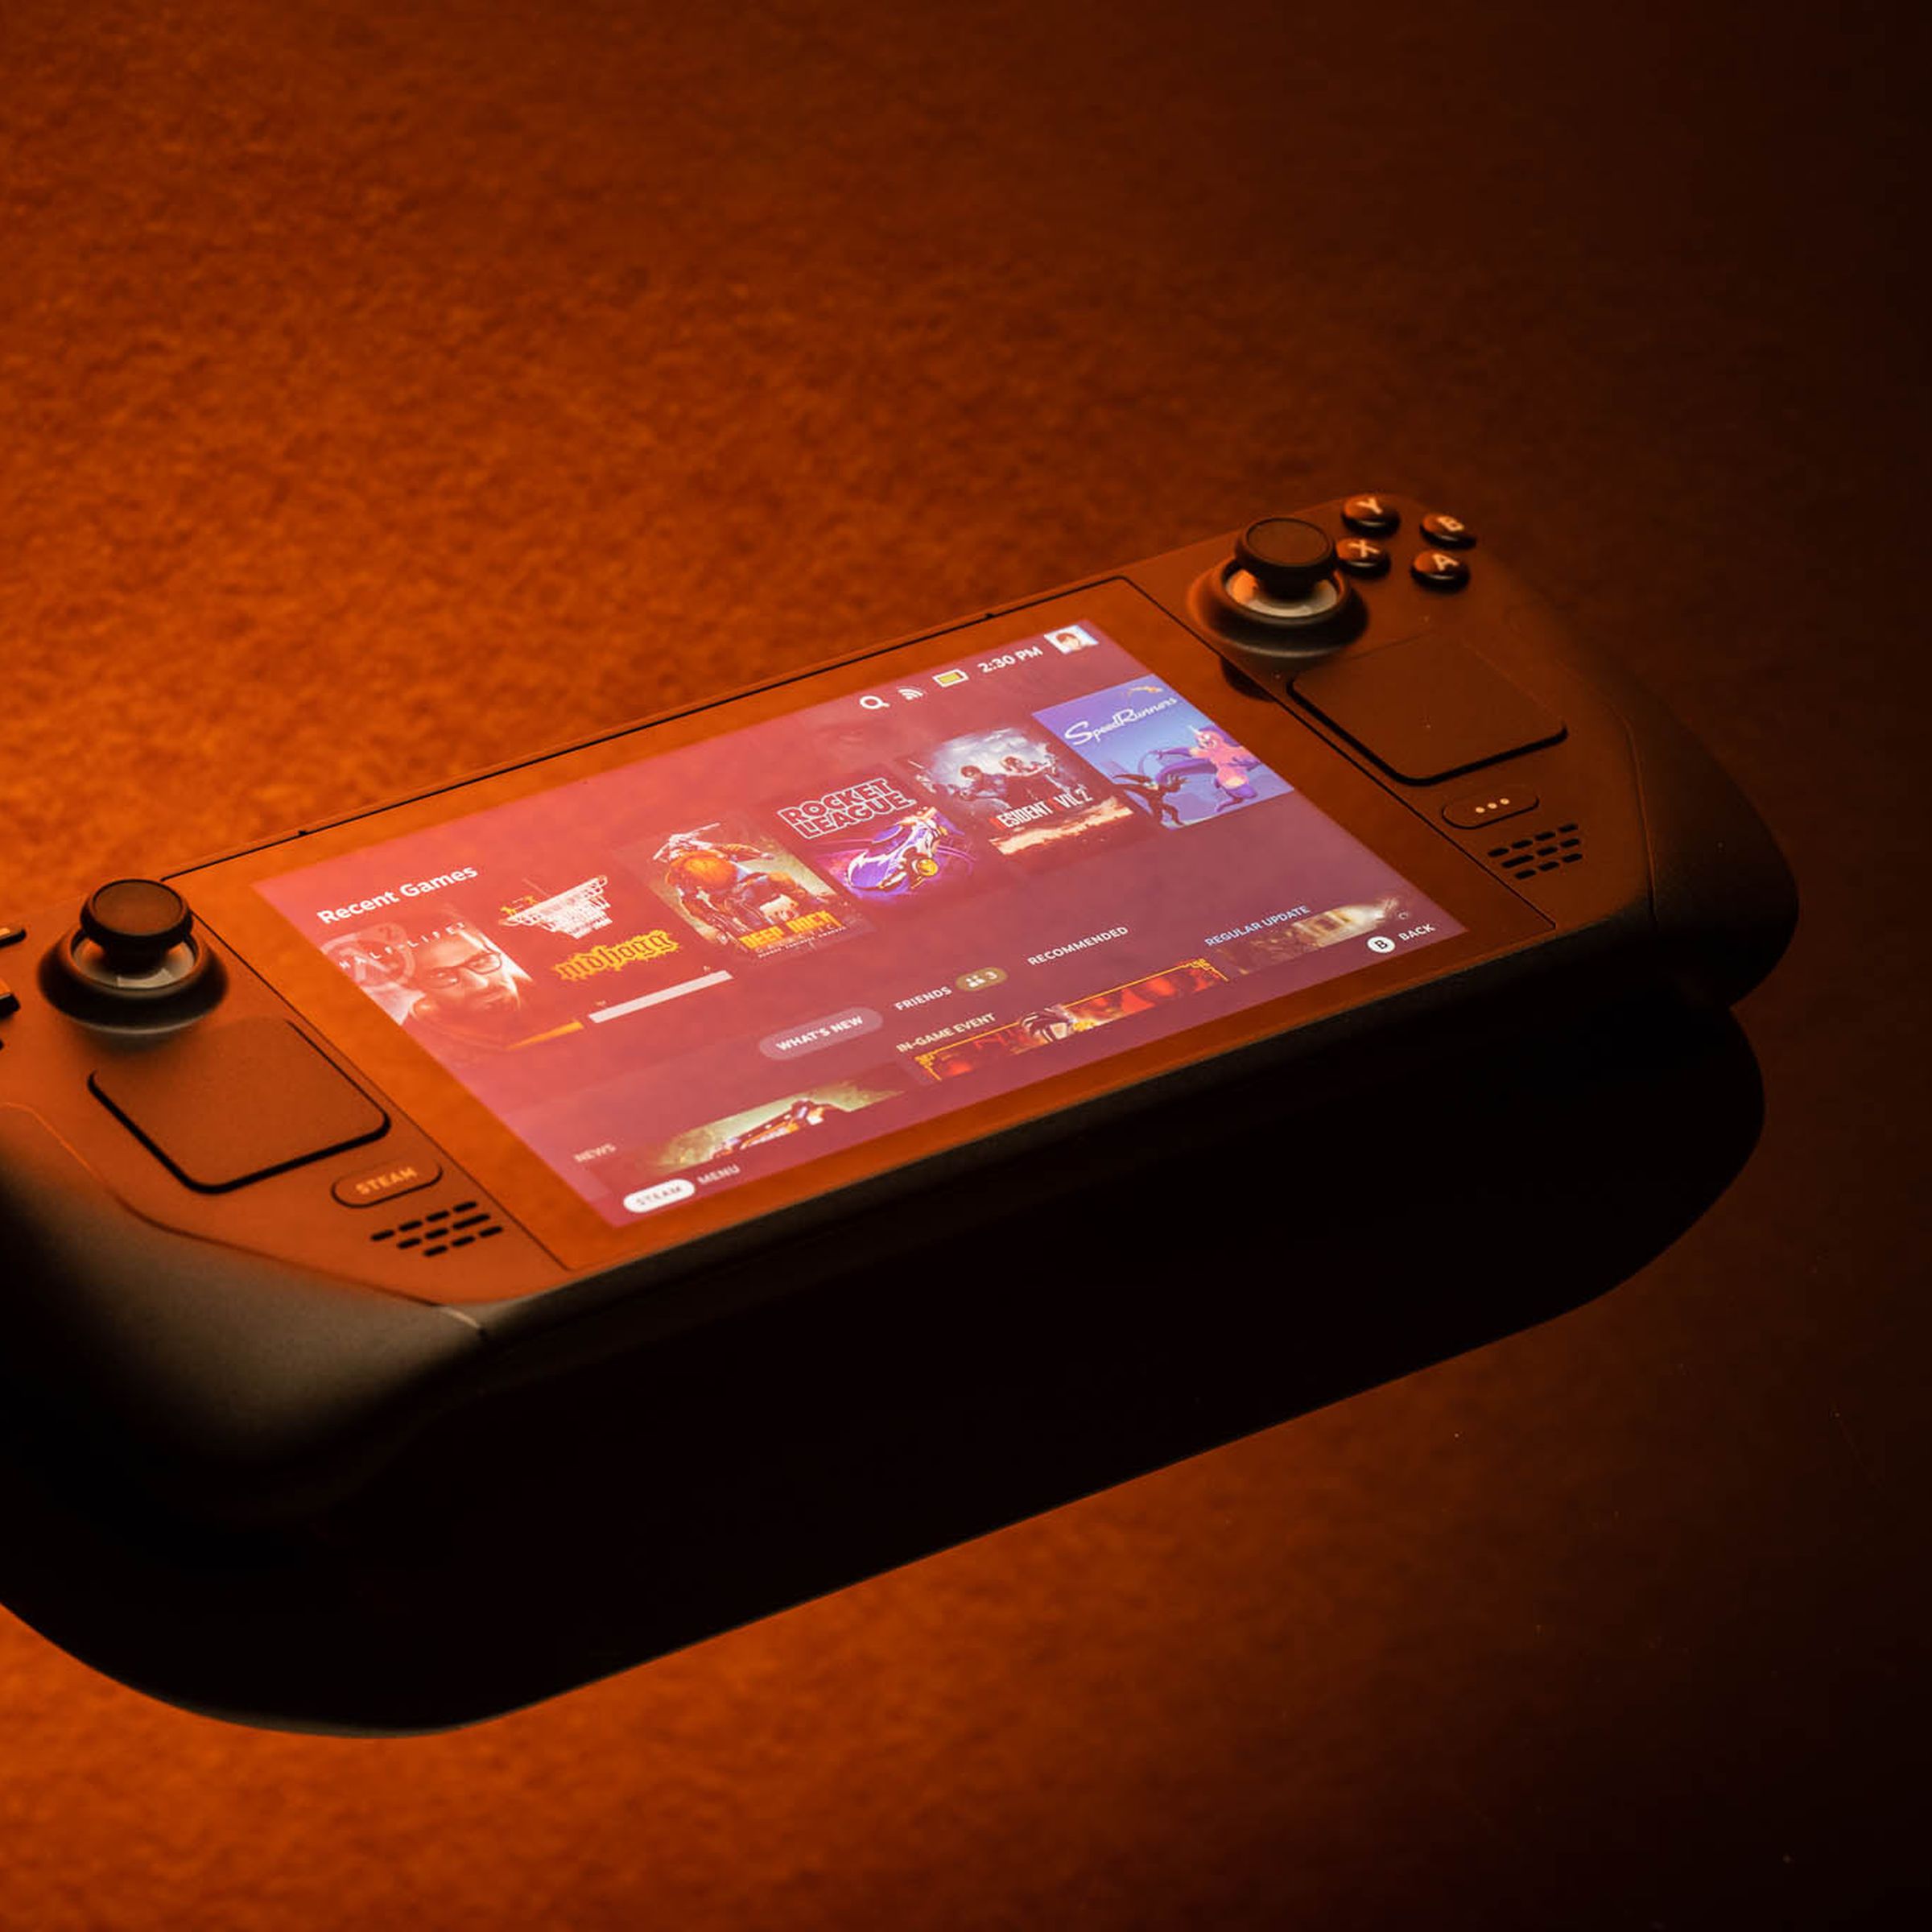 The Steam Deck gaming handheld, lit solely by orange light, giving a bit of a sunset or fire feel